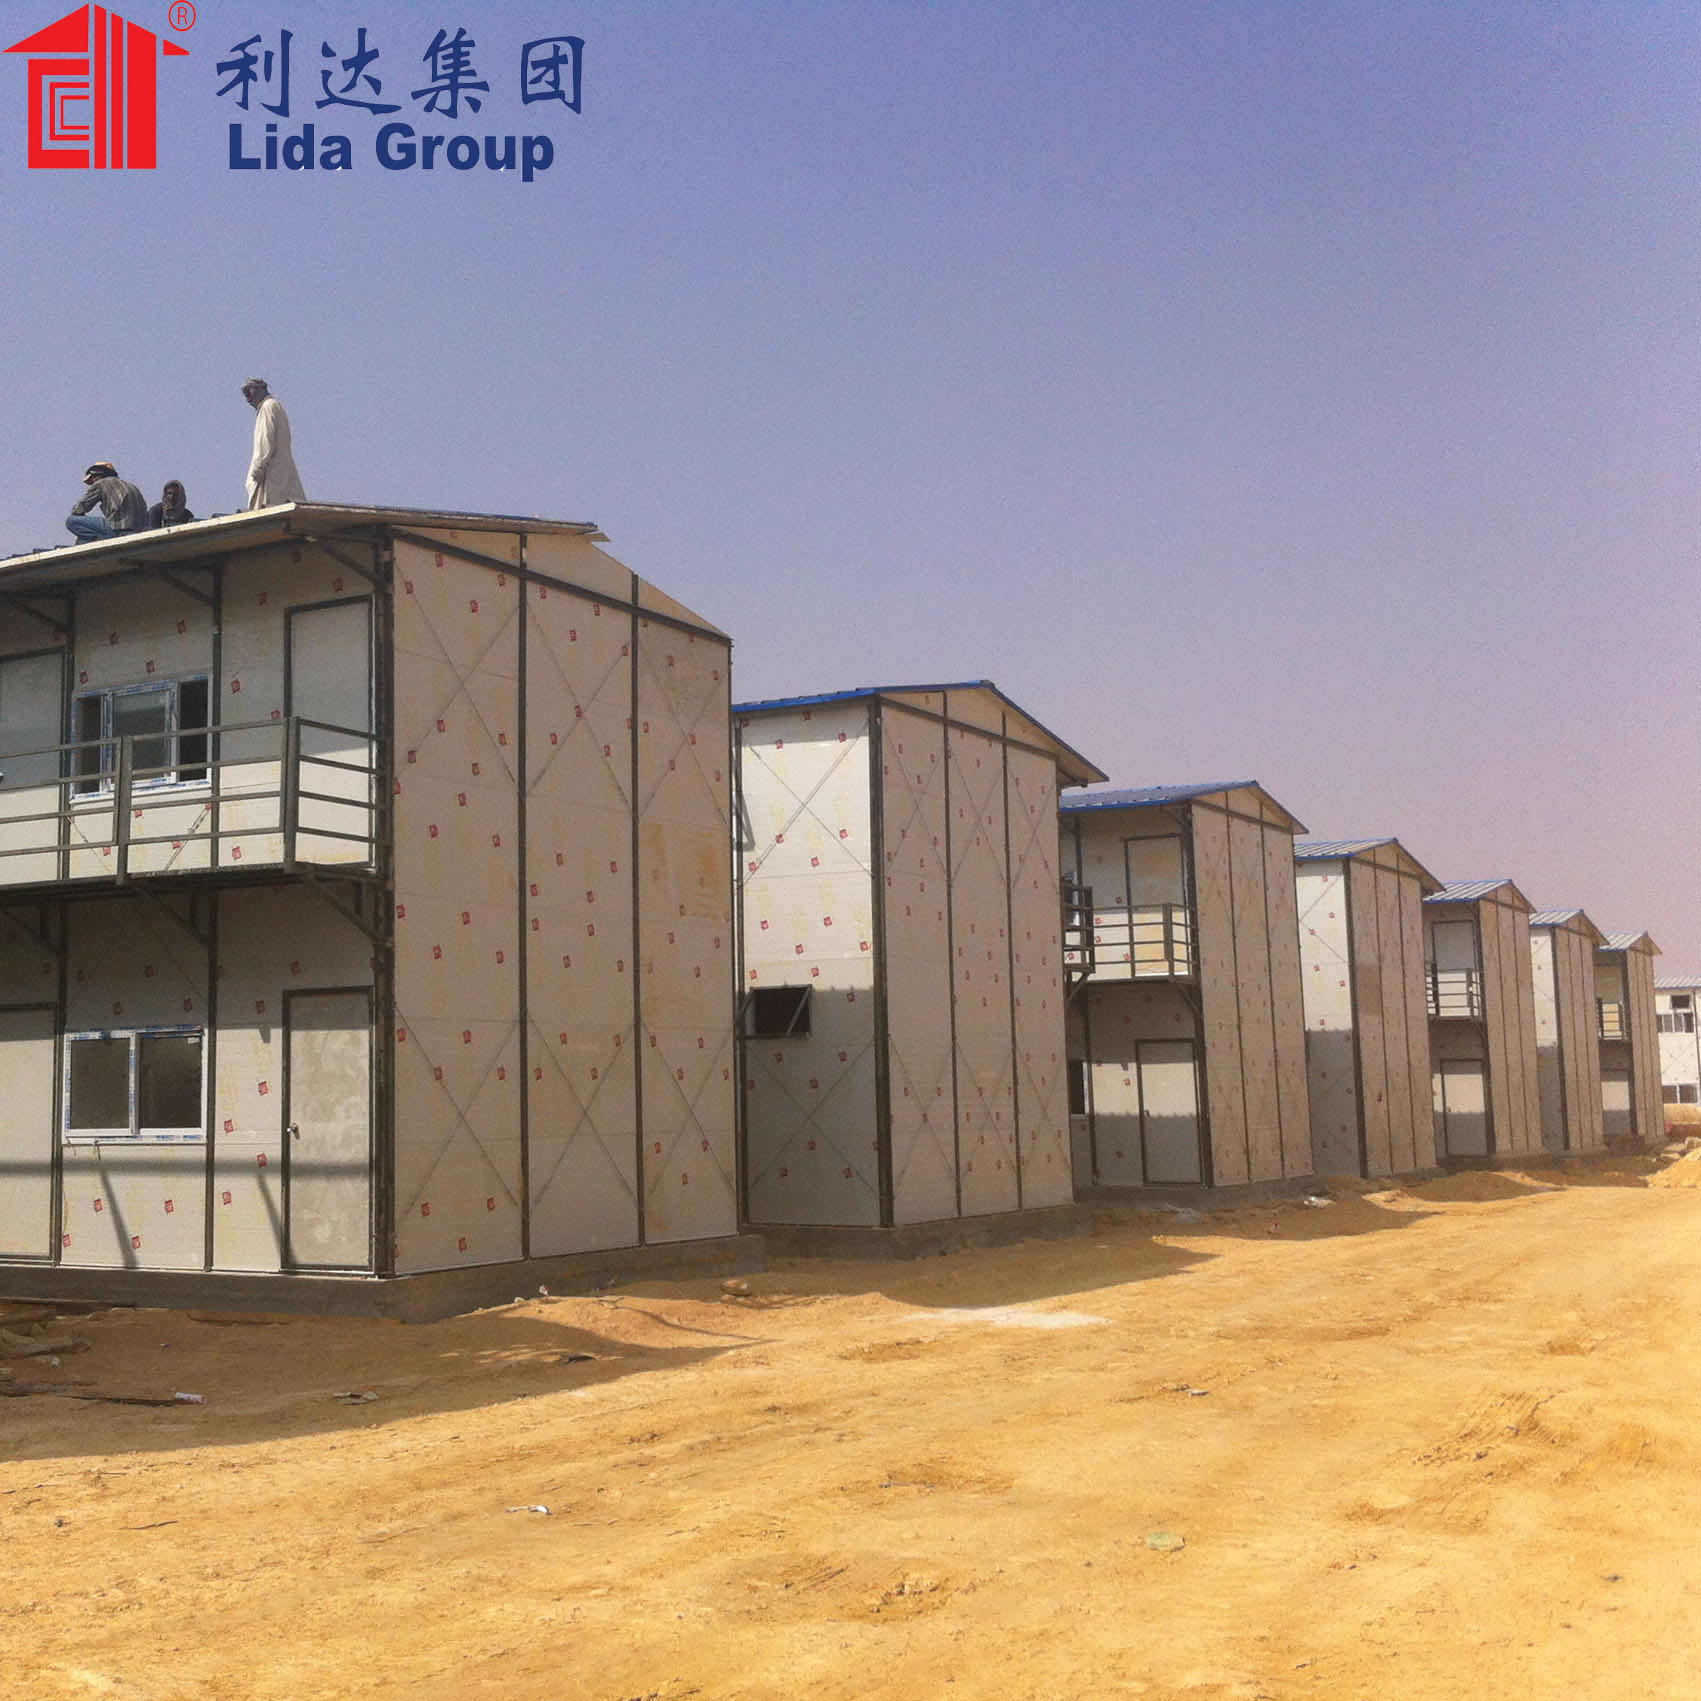 West africa construction site mining and oil gas project worker accommodation camp